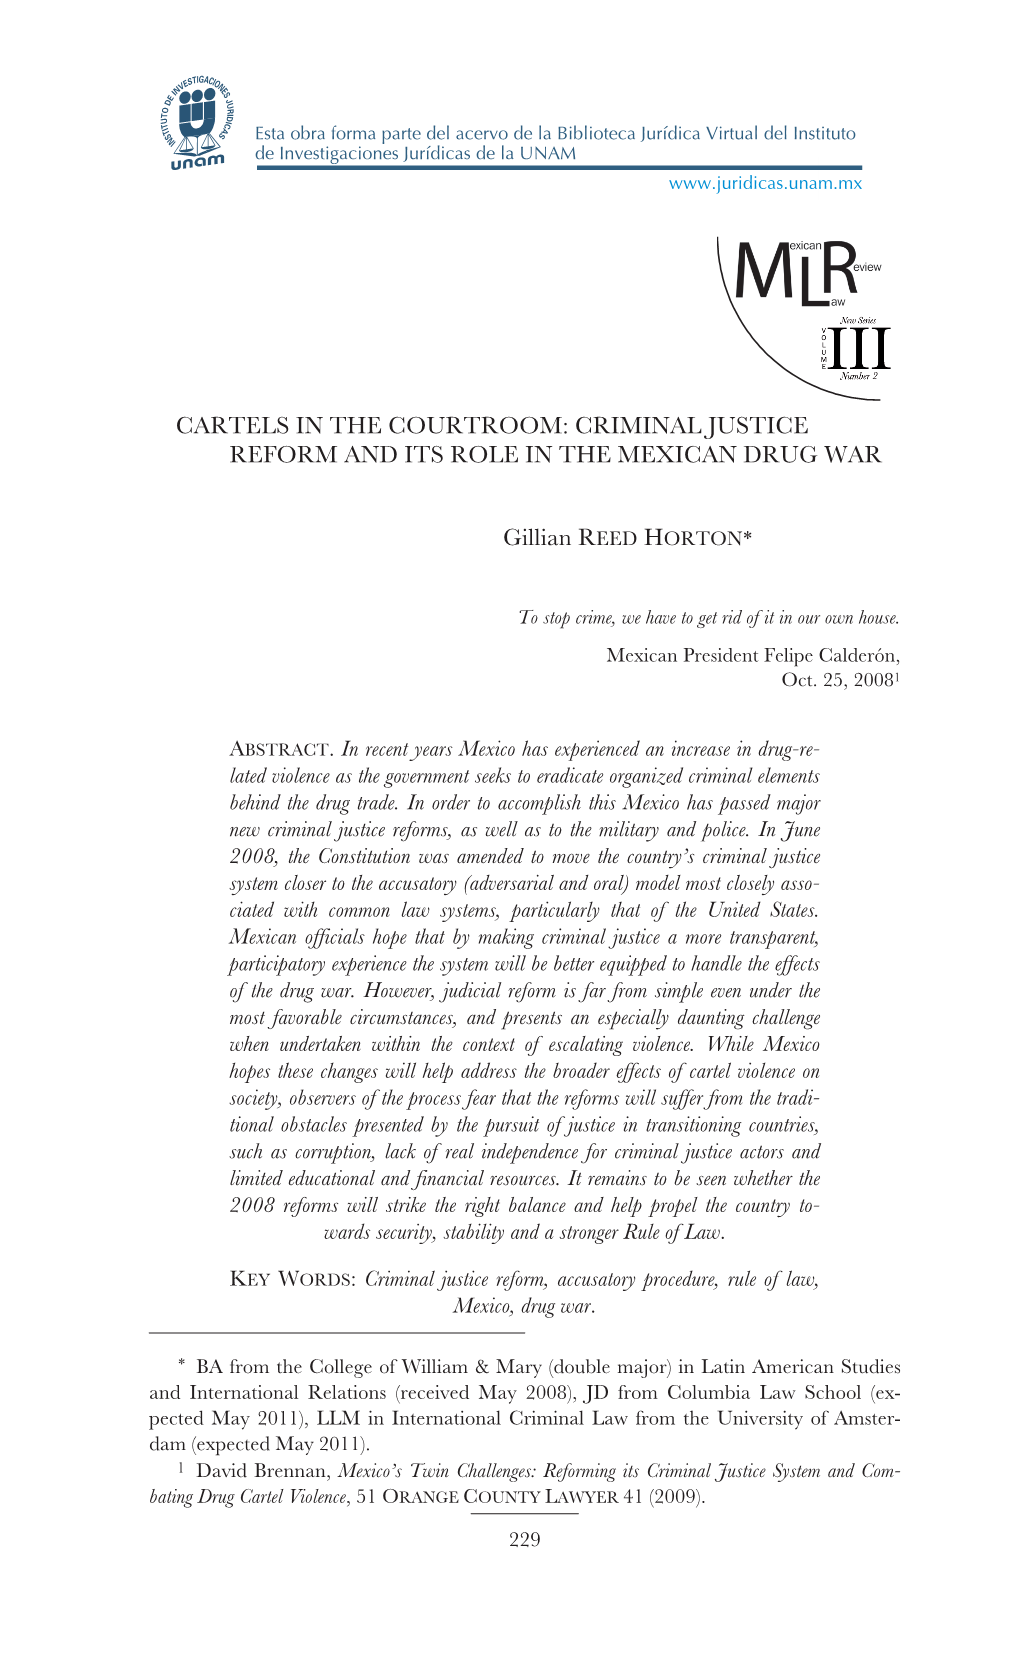 CARTELS in the COURTROOM: CRIMINAL JUSTICE REFORM and ITS ROLE in the MEXICAN DRUG WAR Gillian REED HORTON